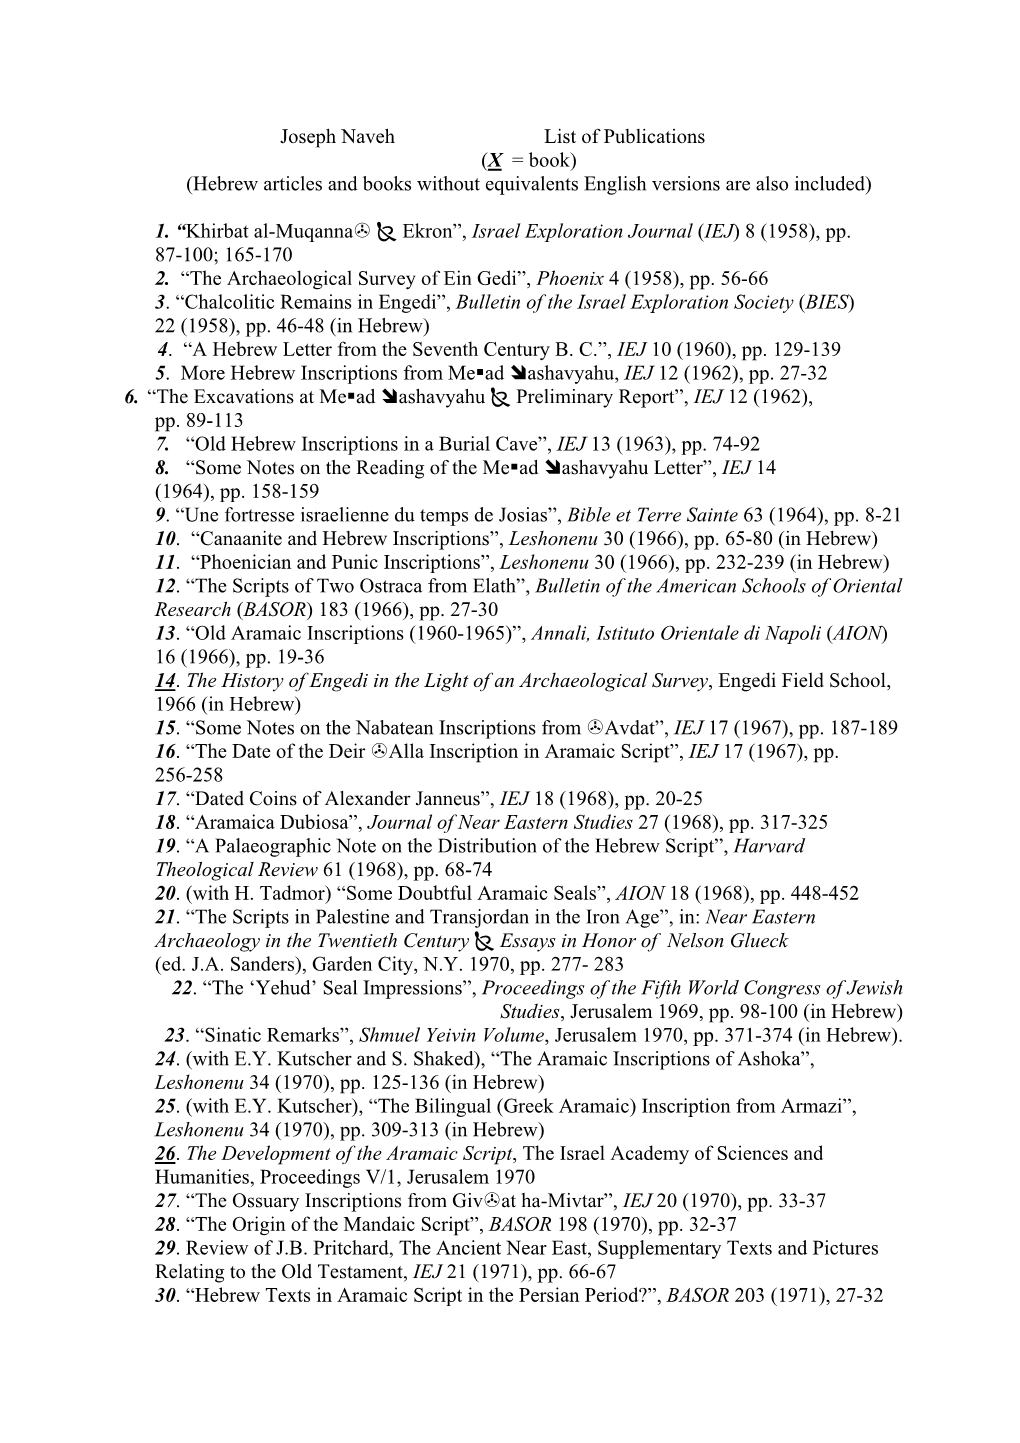 Joseph Naveh List of Publications (X = Book) (Hebrew Articles and Books Without Equivalents English Versions Are Also Included)